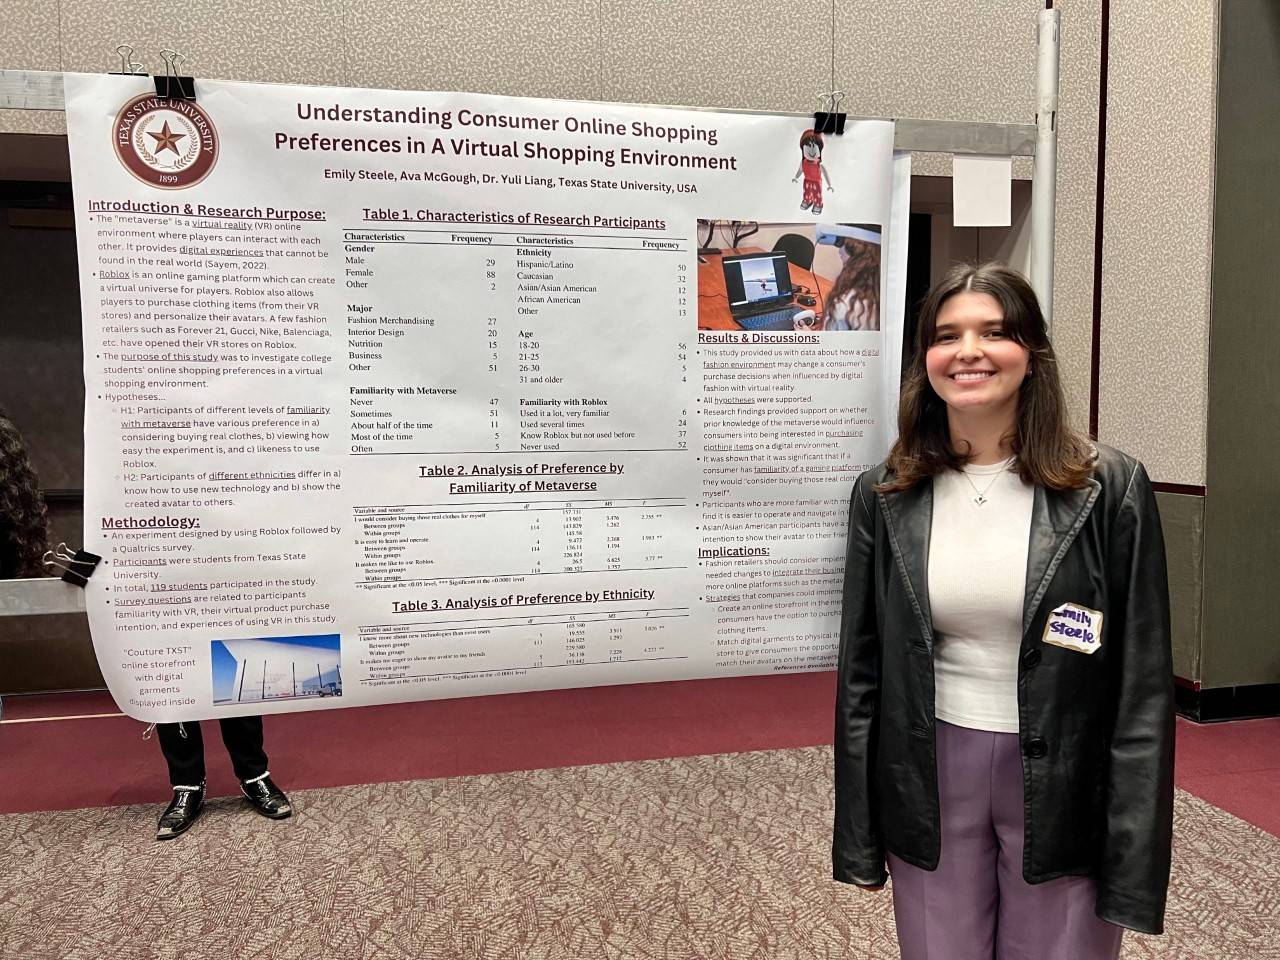 Girl in front of poster presentation